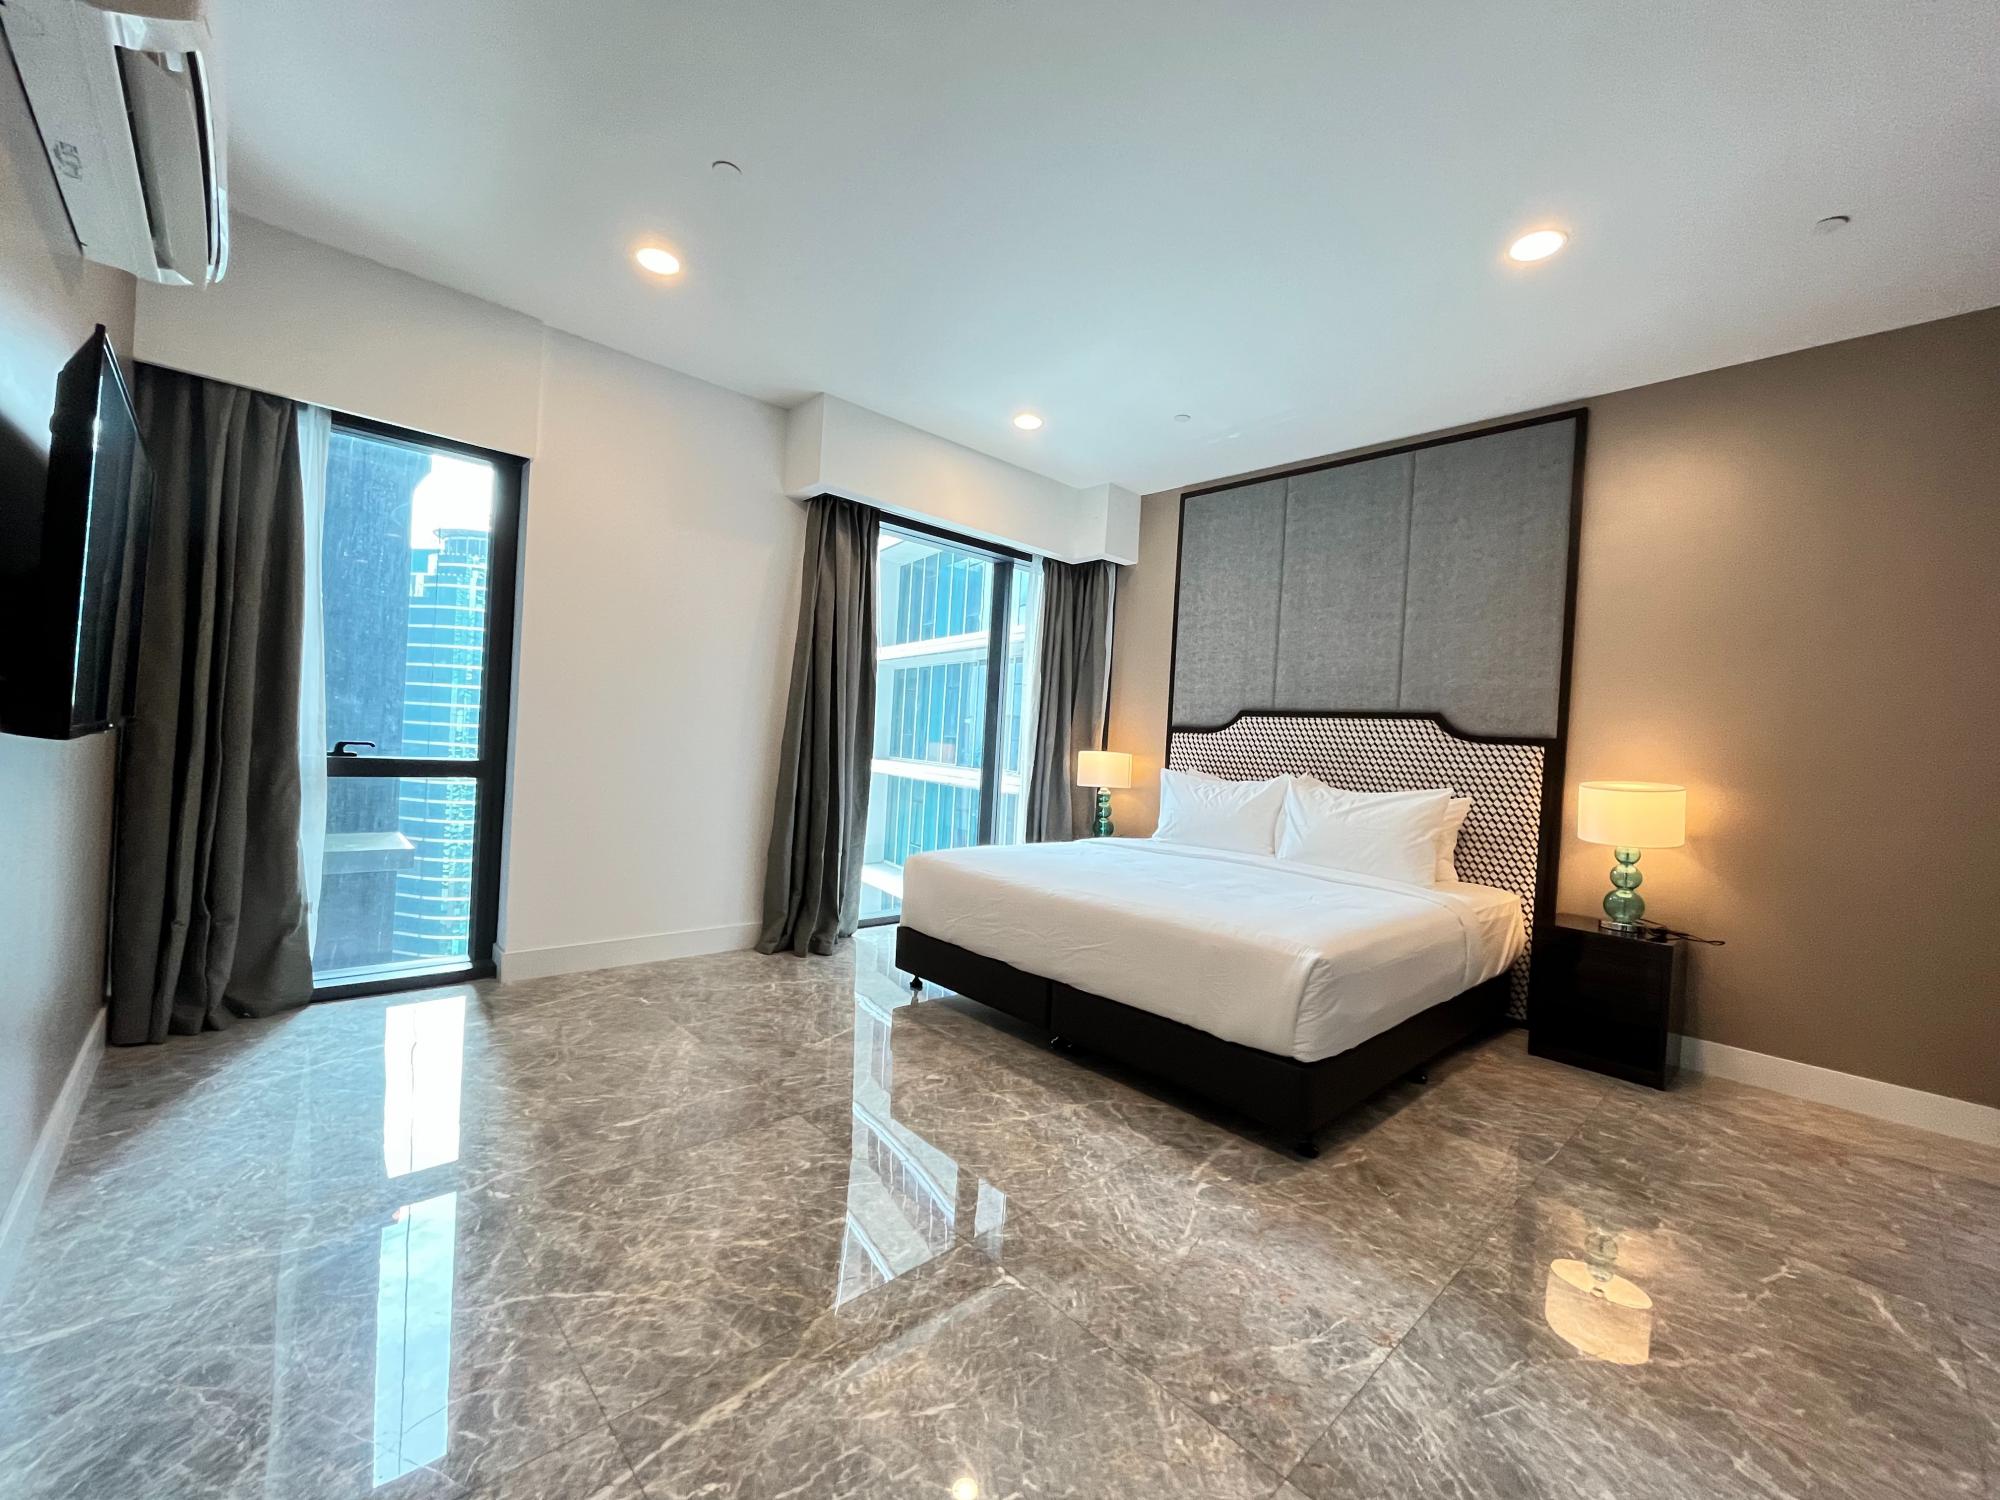 Property Image 1 - Modern and Spacious One Bedroom apartment in the Heart of Kuala Lumpur